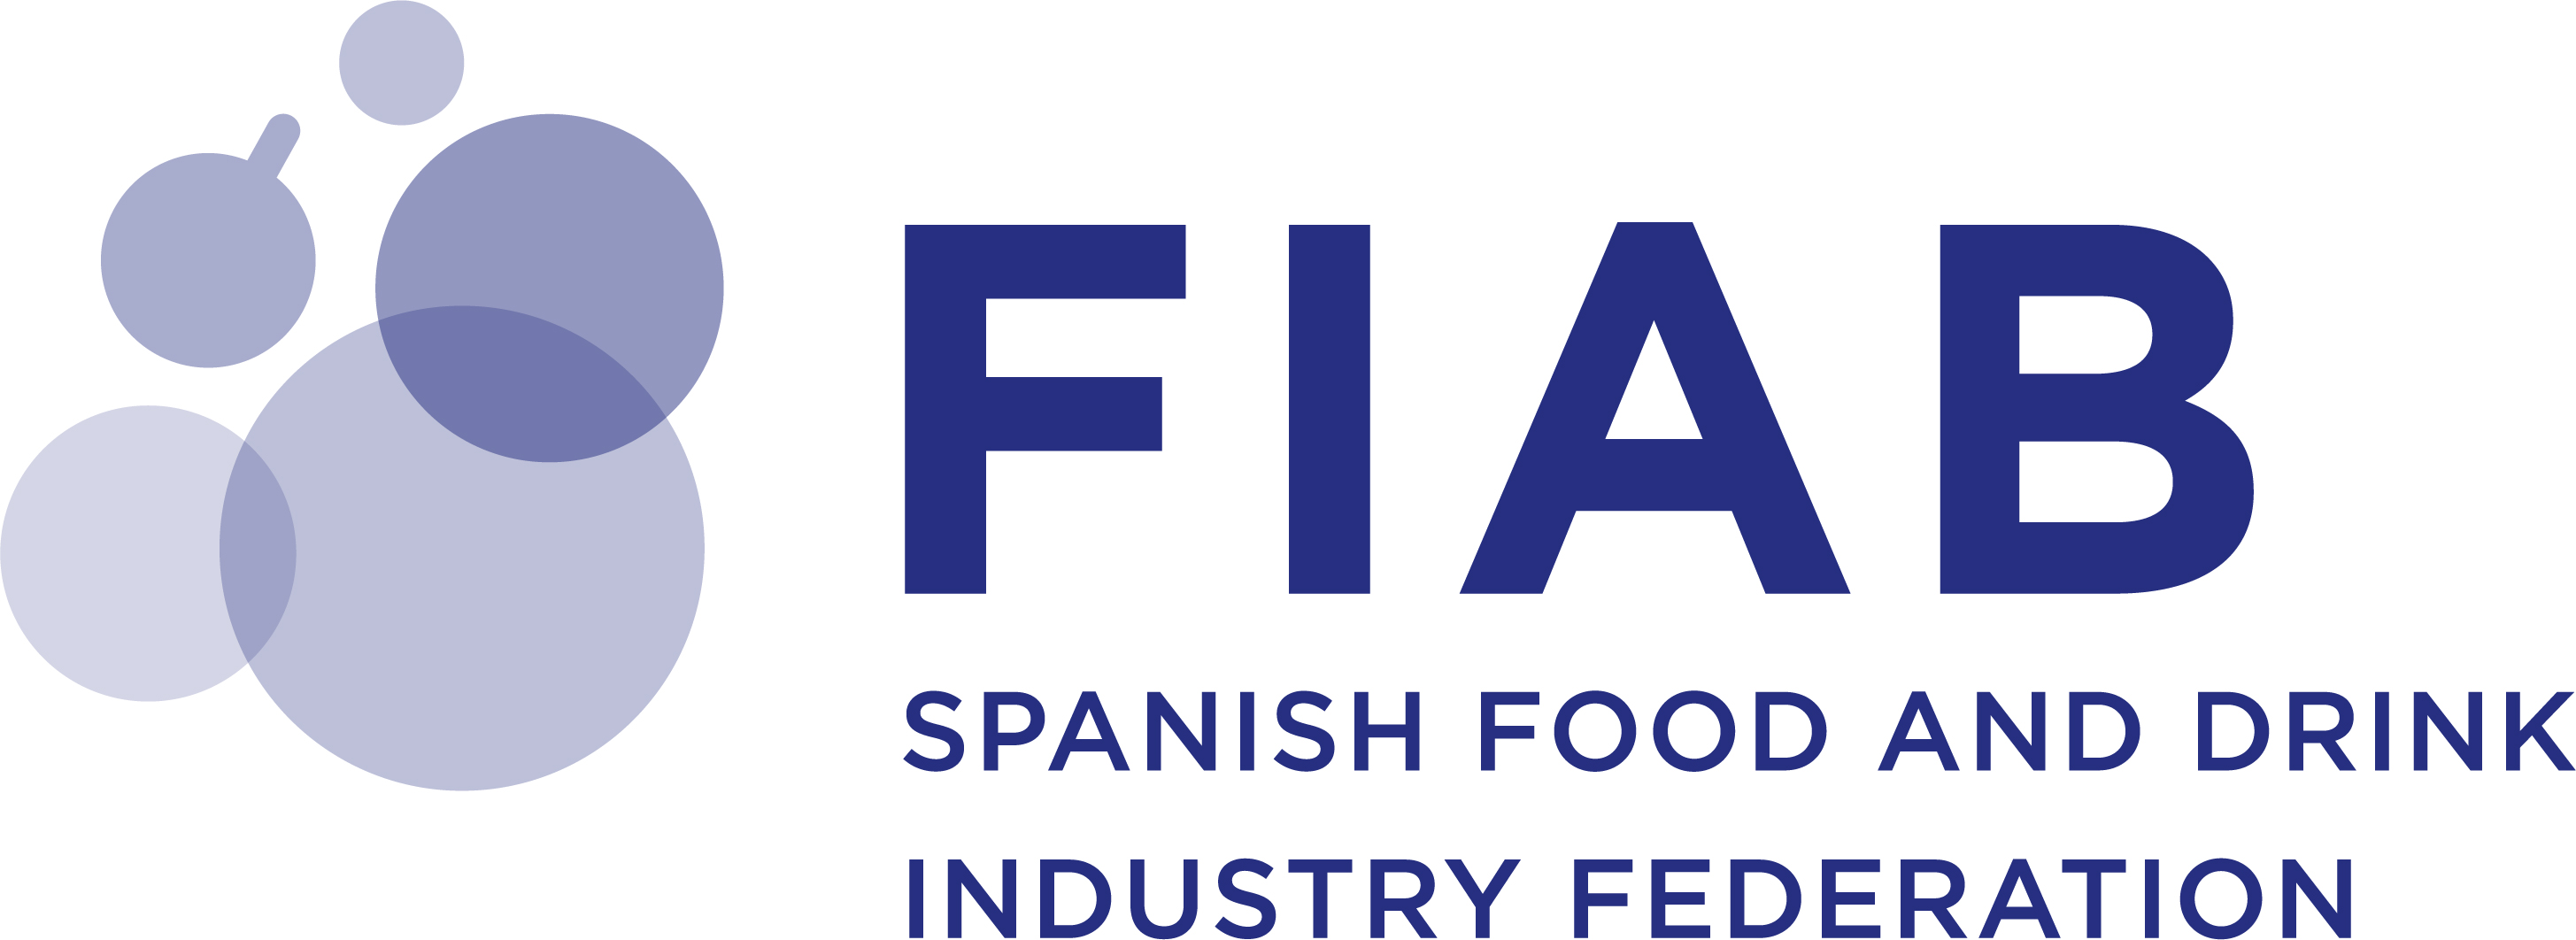 FIAB- THE SPANISH FOOD AND DRINK INDUSTRY FEDERATION